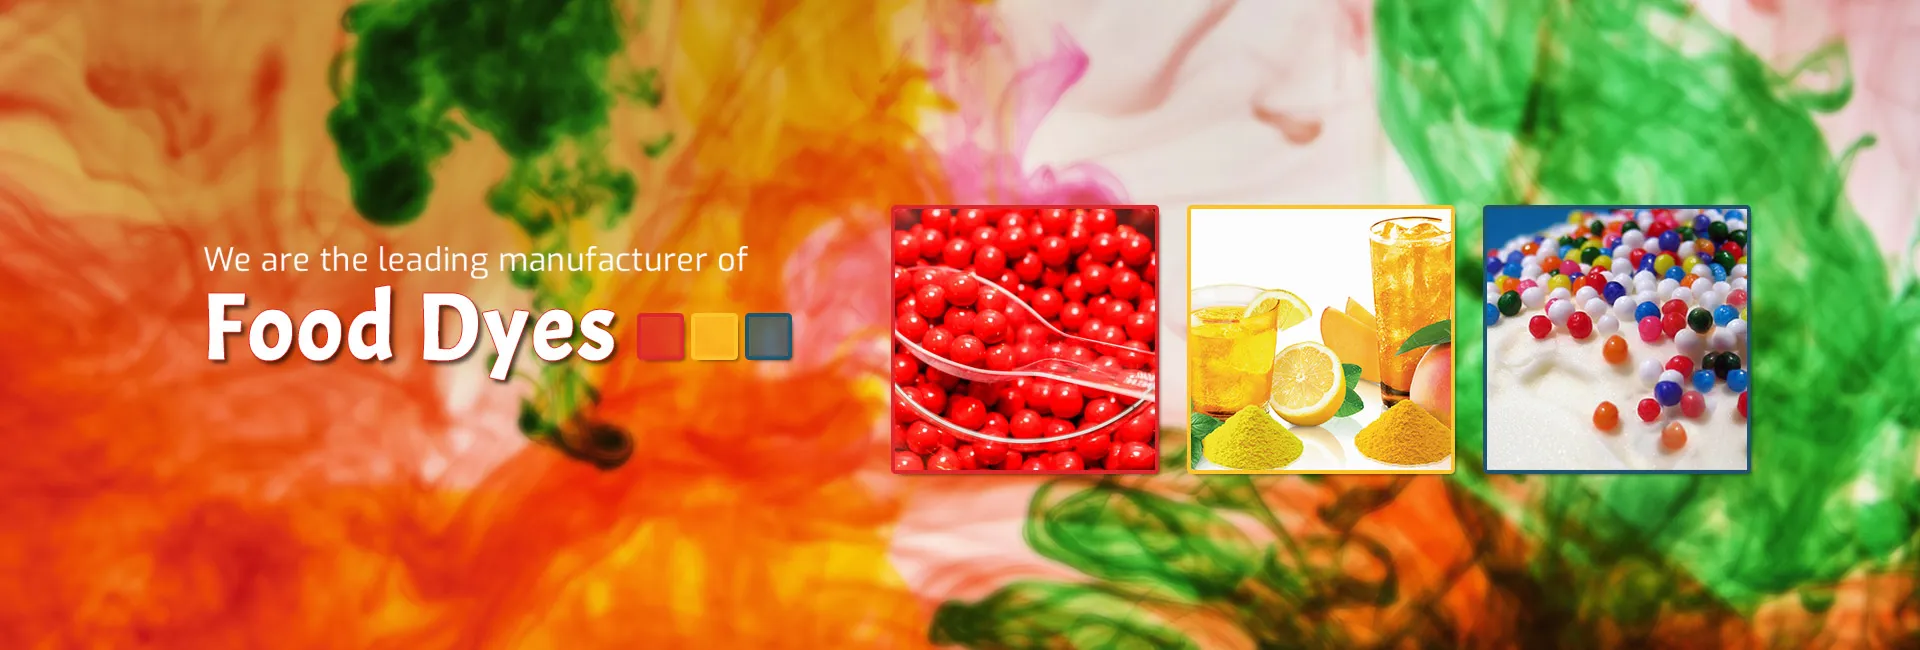 Food Dyes Manufacturer & Suppliers in Mexico